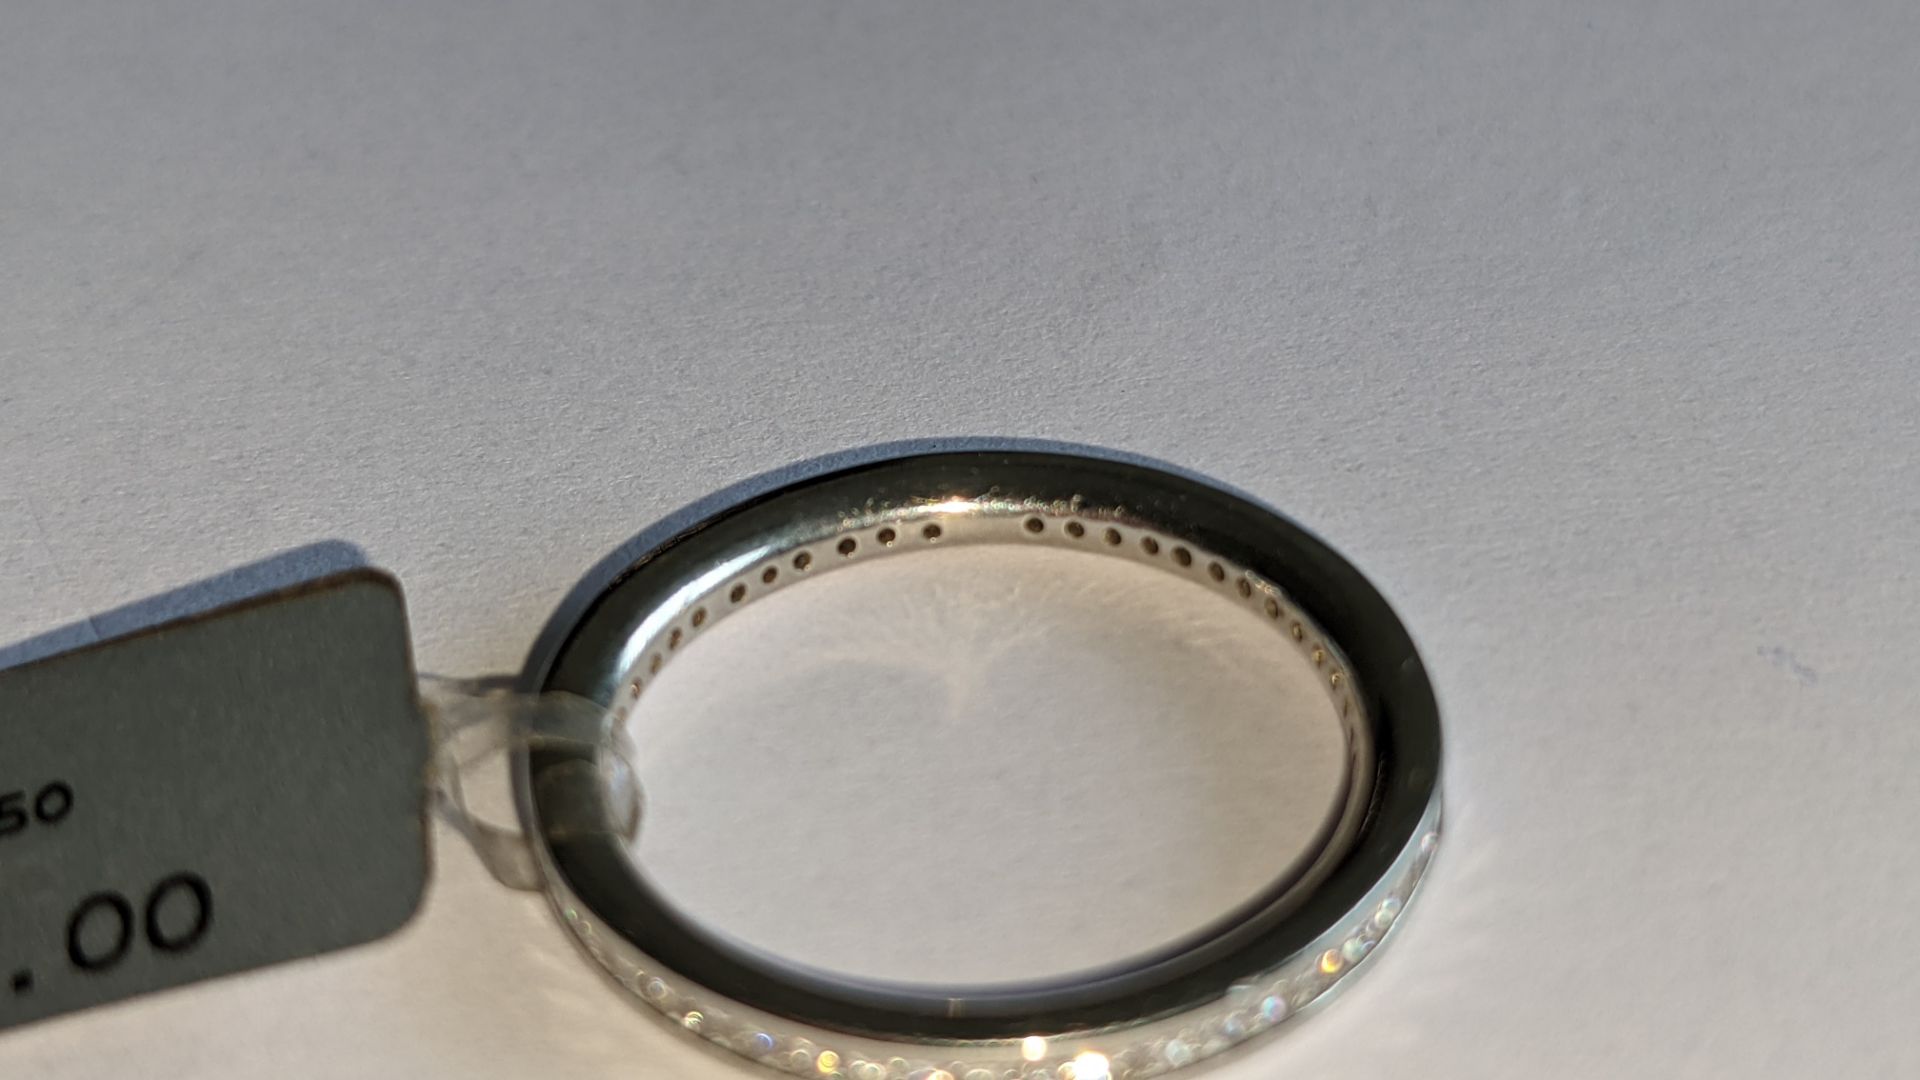 Eternity ring in Platinum 950 with 0.62ct of diamonds. RRP £2,097 - Image 6 of 14